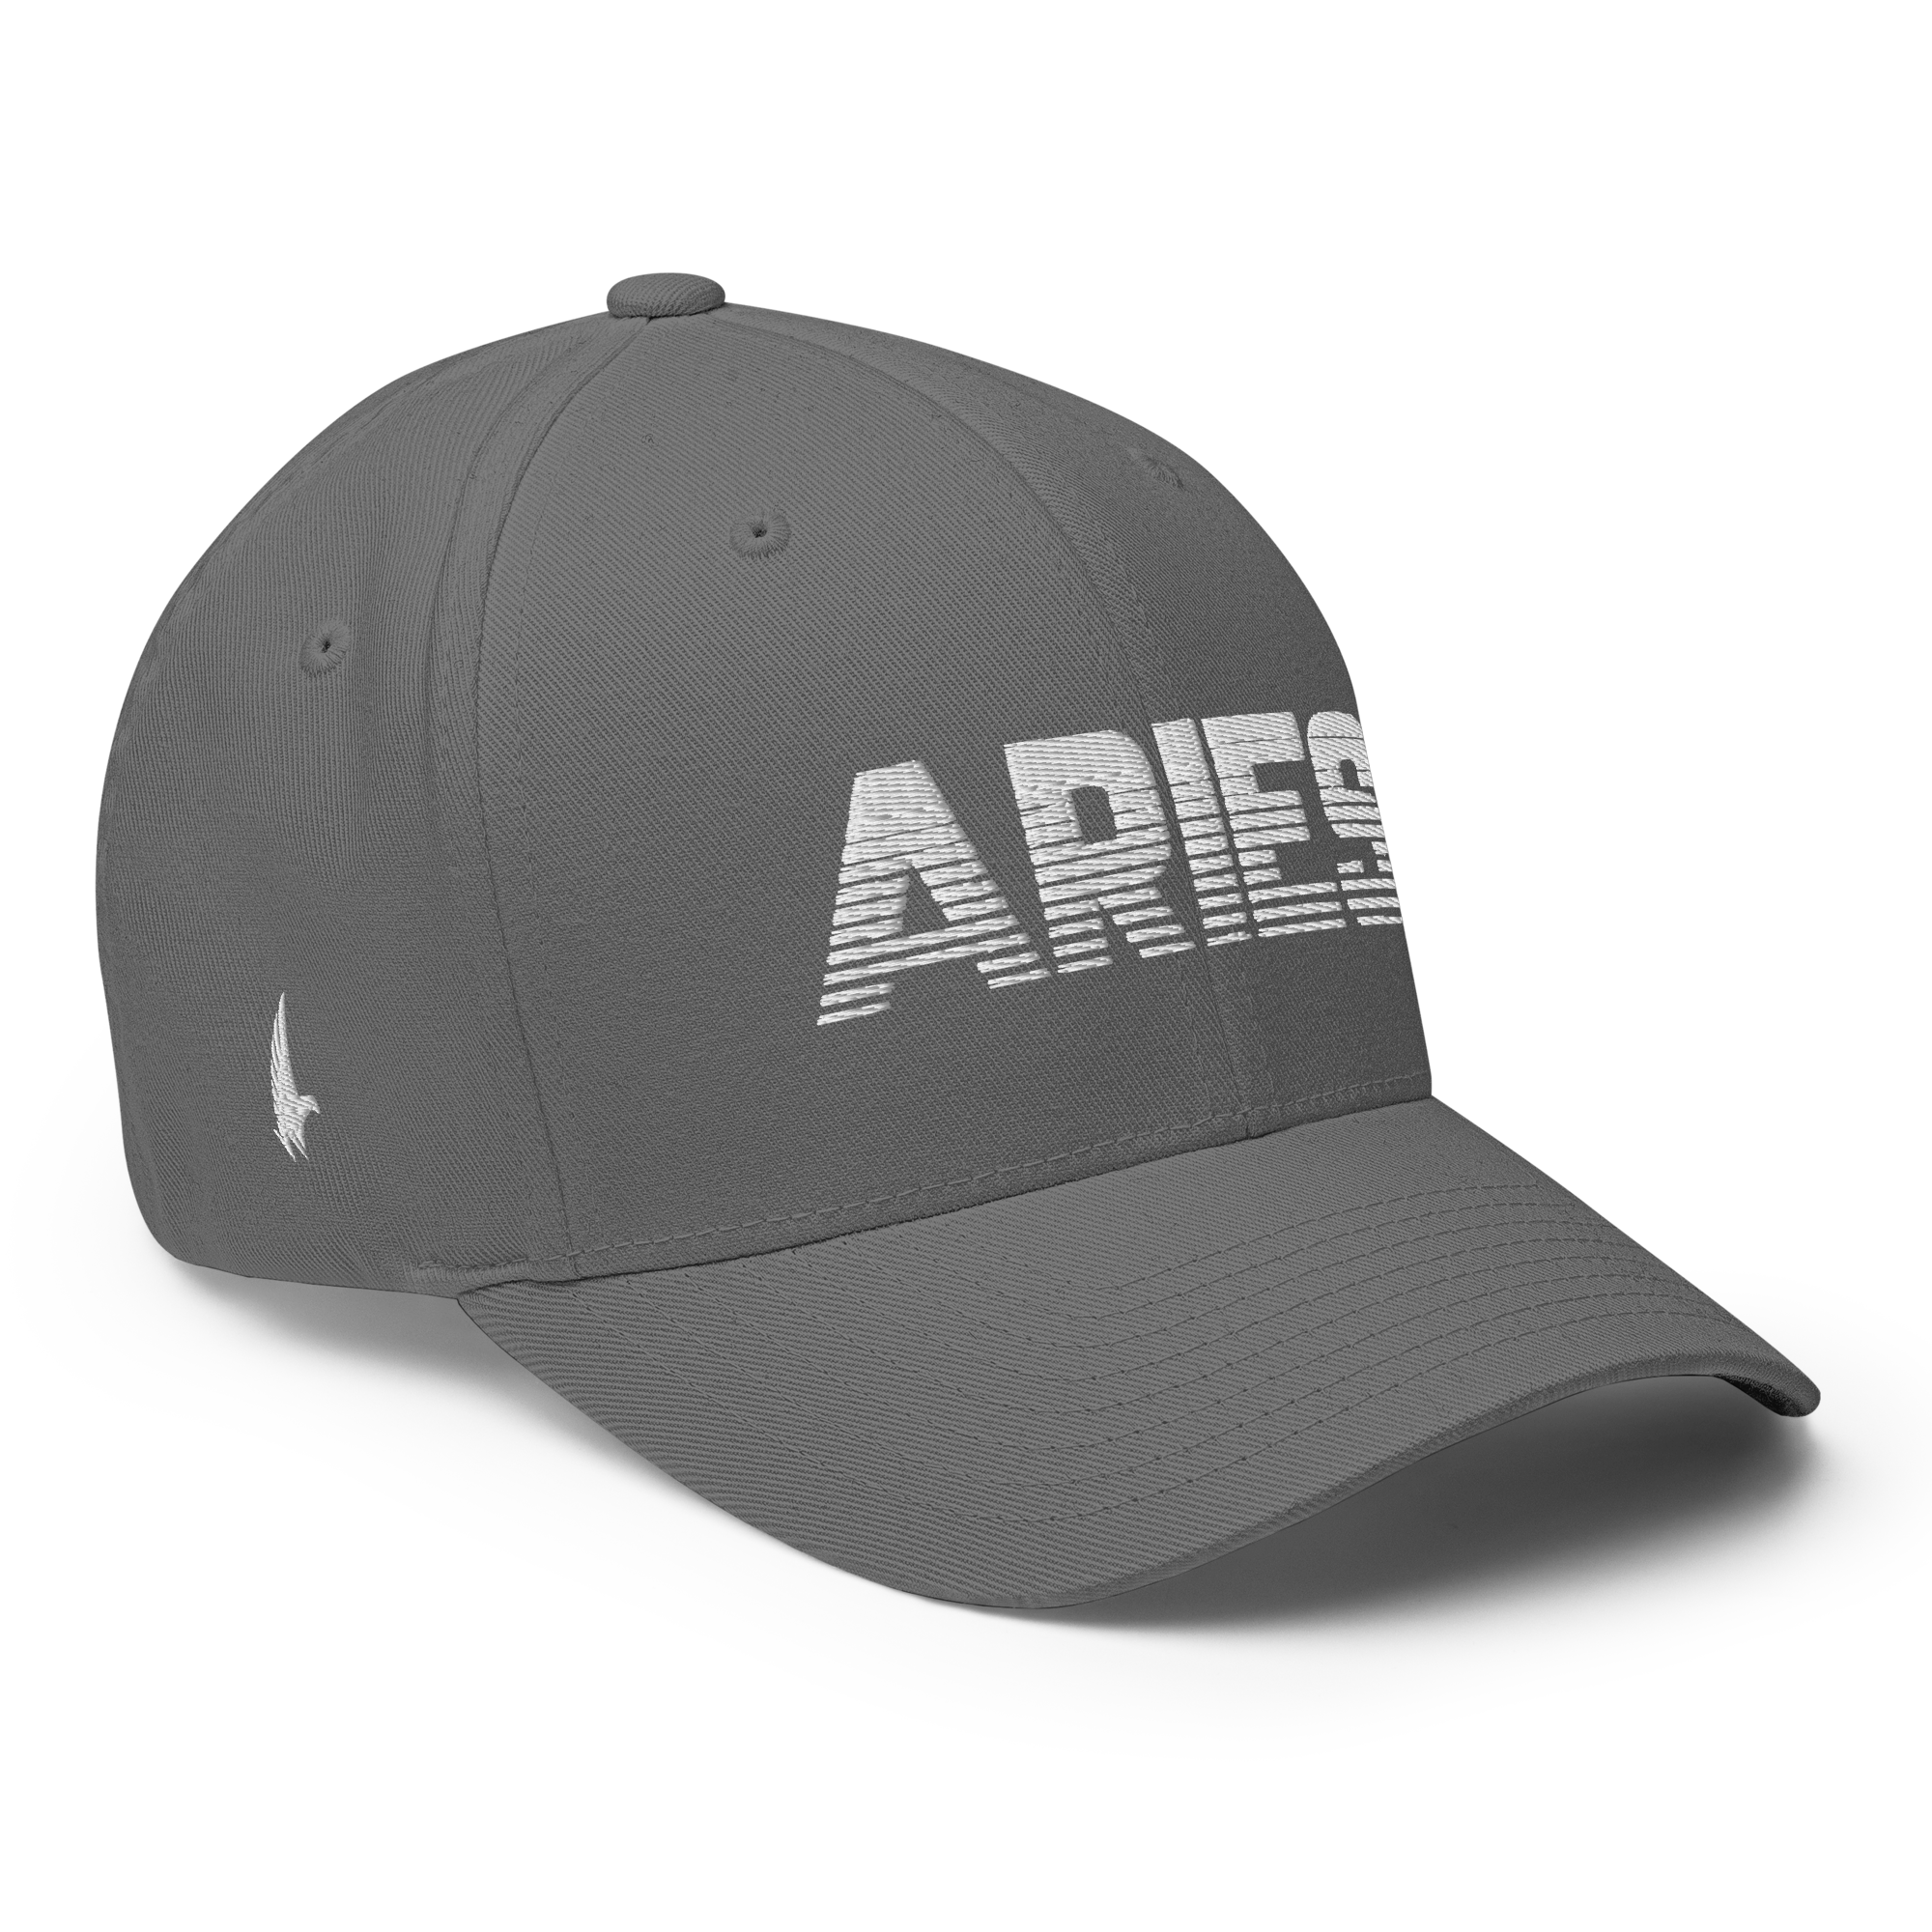 Aries Fitted Hat Grey Fitted - Loyalty Vibes